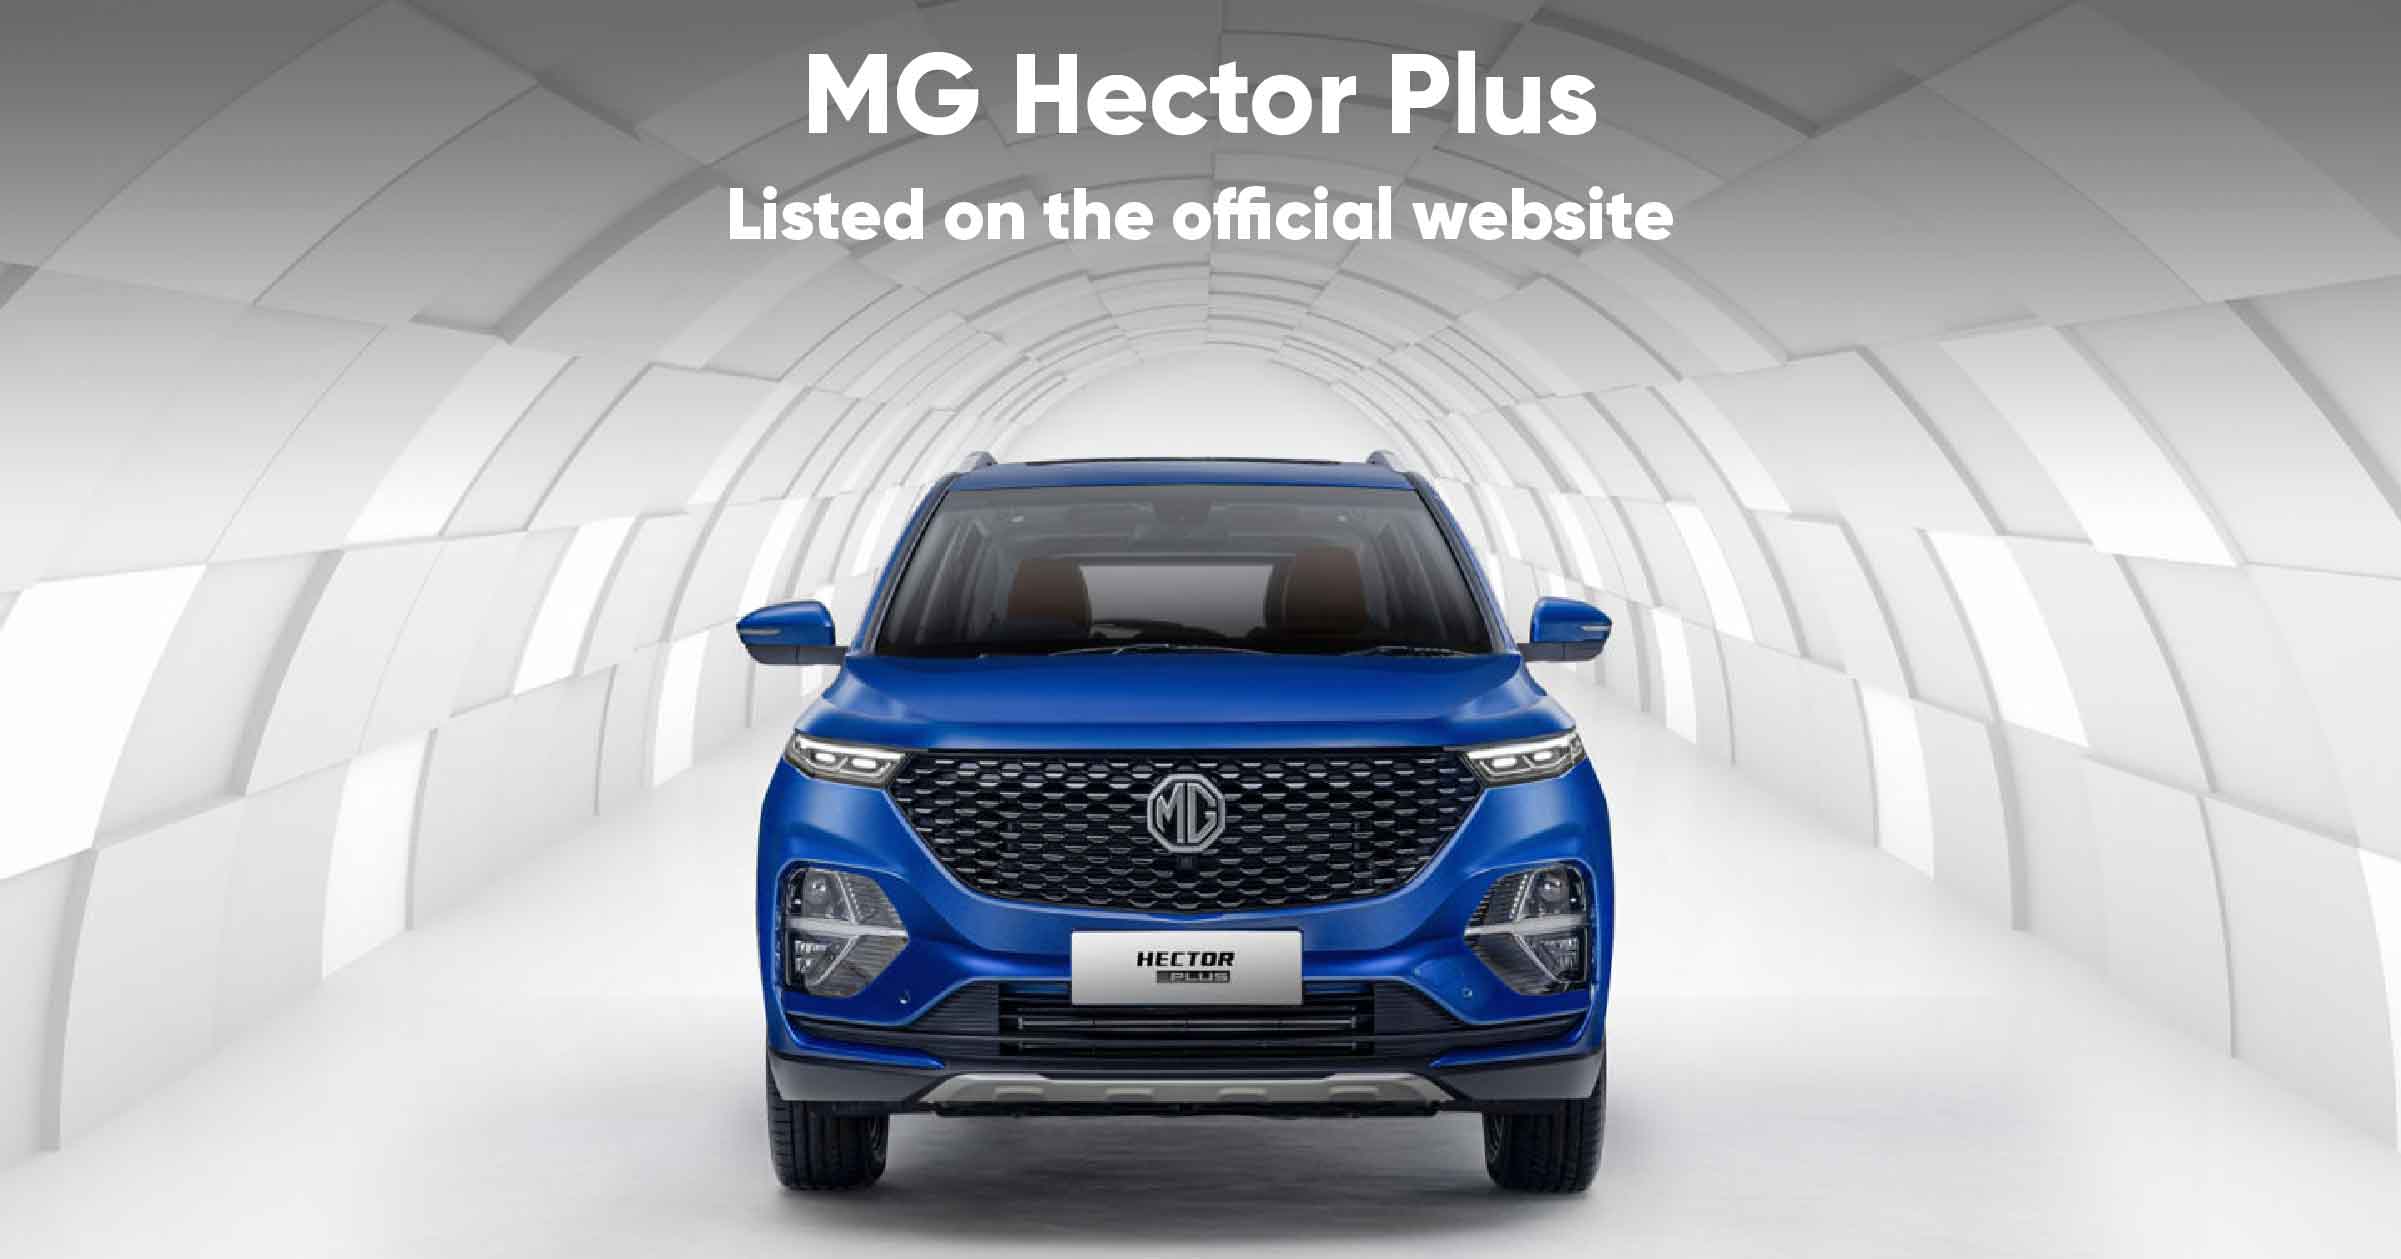 MH Hector Plus Listed on the official website